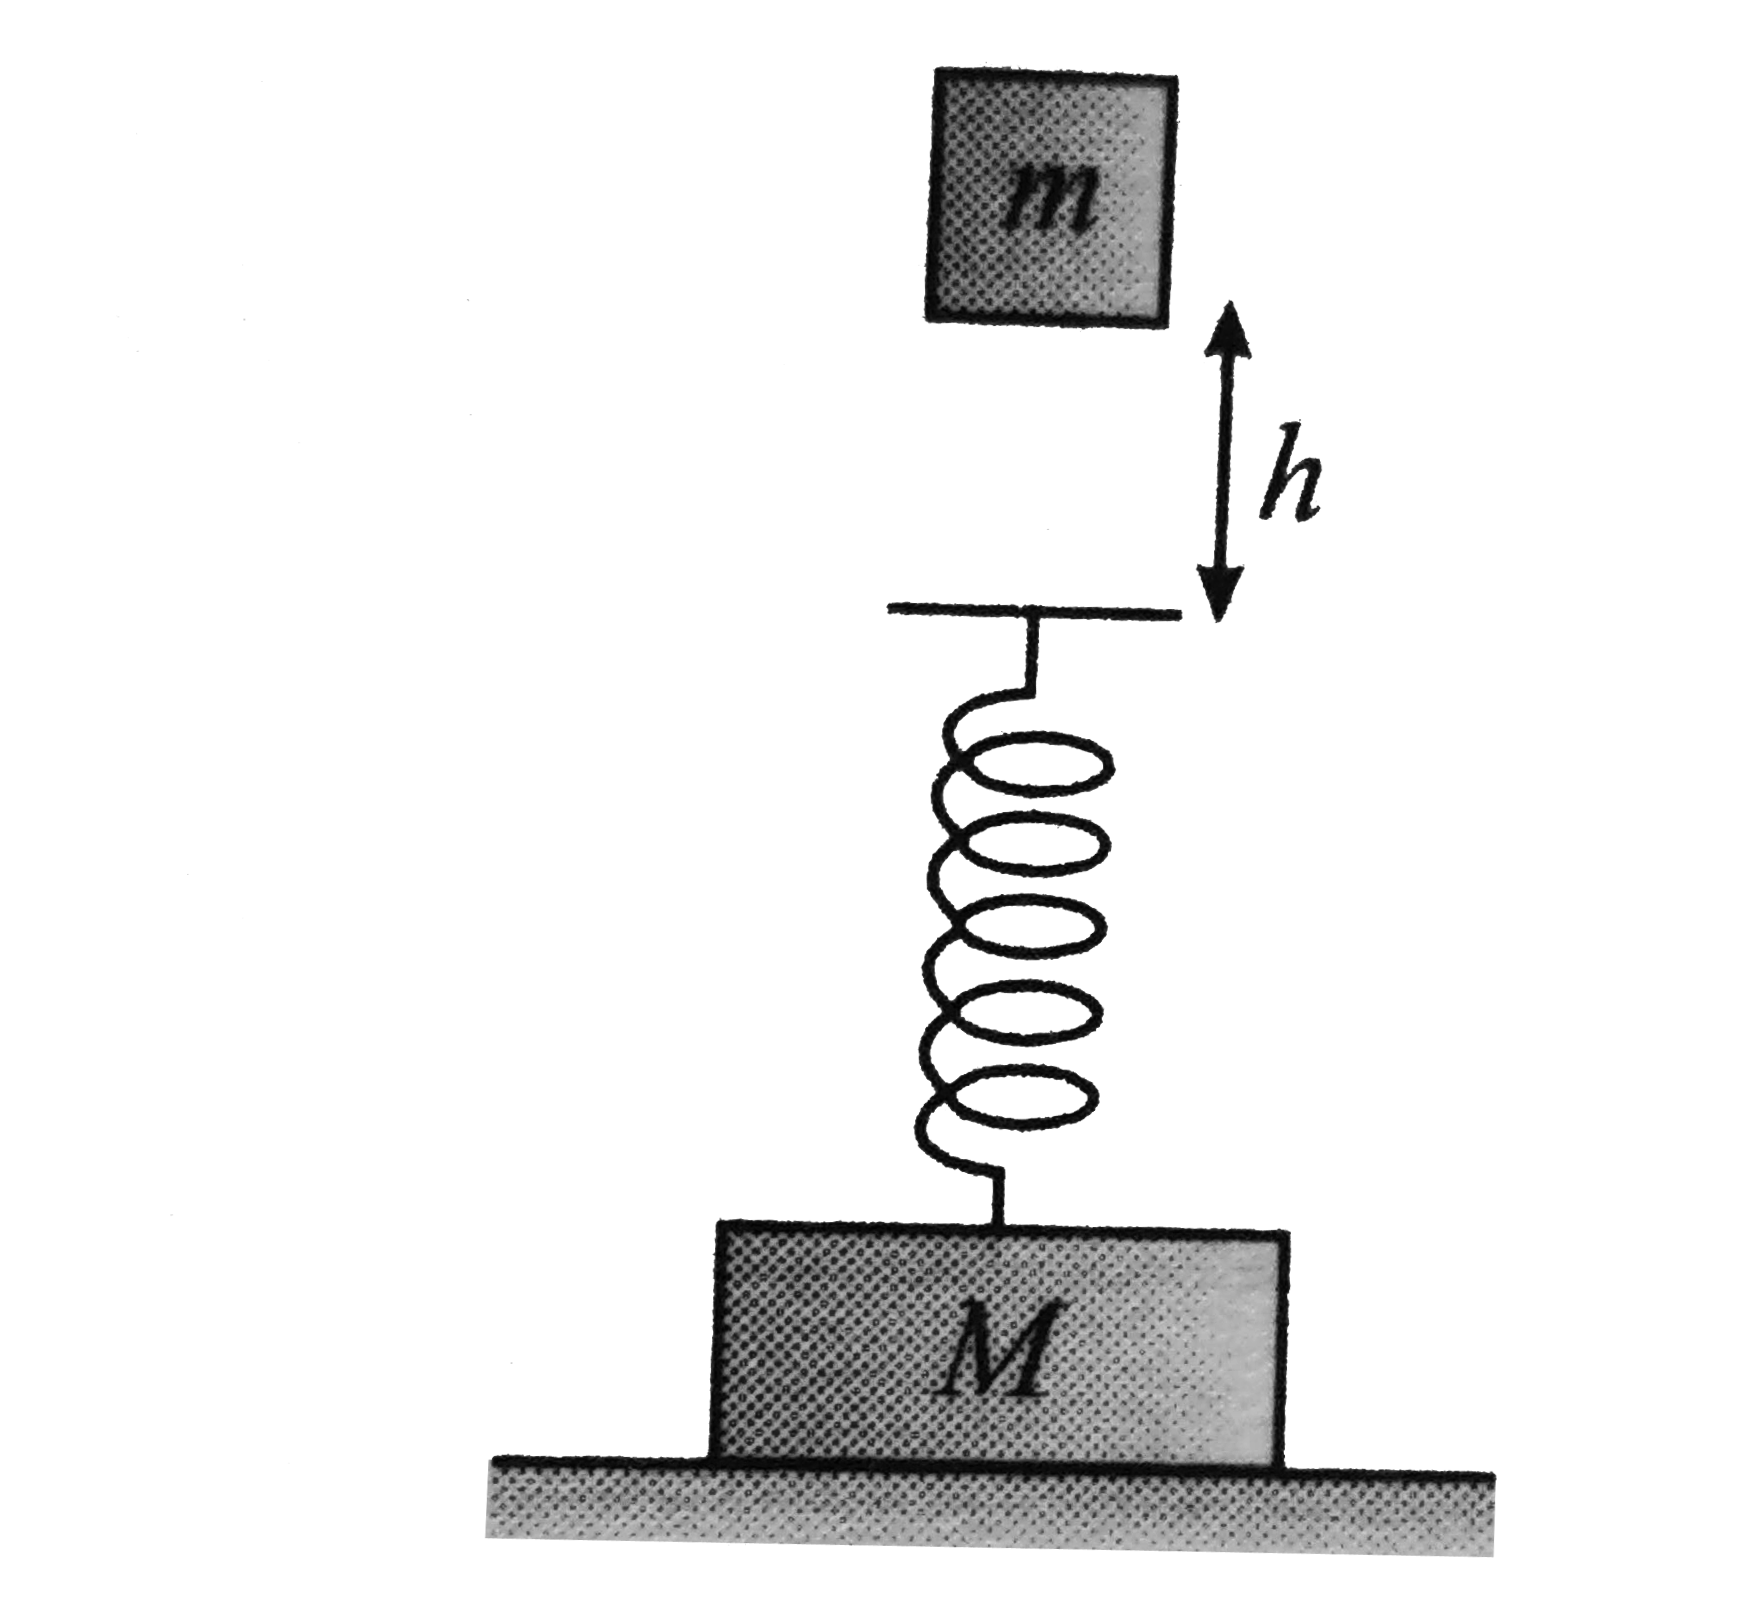 A block of mass m is dropped onto a spring of constant k from a height h. The second end of the spring is attached to a second block of mass M as shown in figure. Find the minimum value of h so that the block M bounces off the ground. If the block of mass m sticks to the spring immediately after it comes into contact with it.